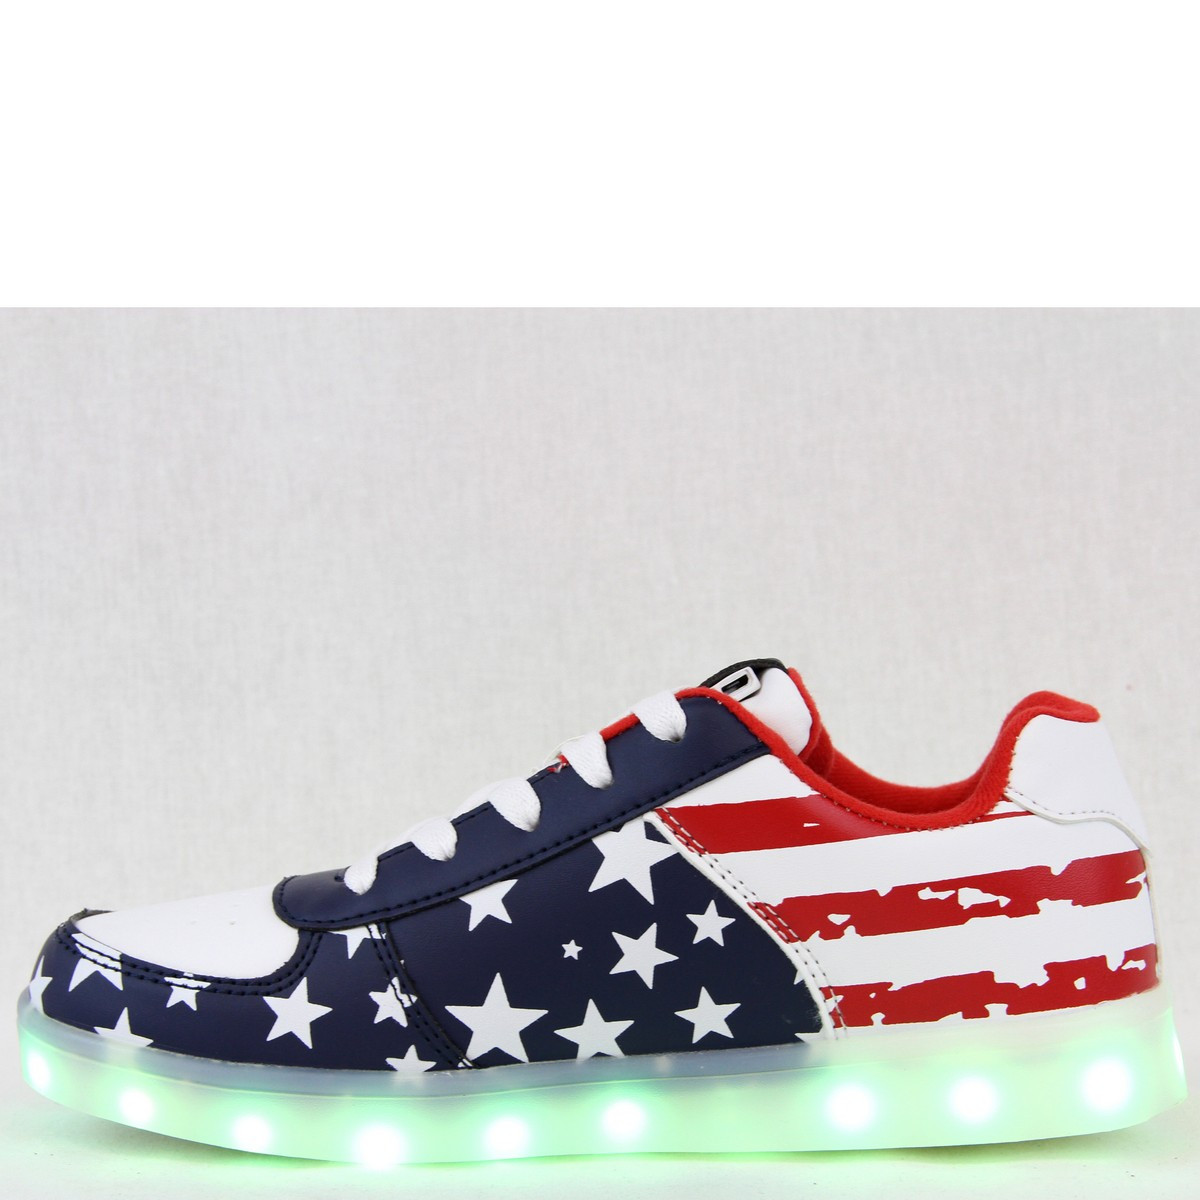 Issue Disappointed translate Women Sneaker Lightweight 7 Mode LED Light Up Tennis Shoes USA Flag